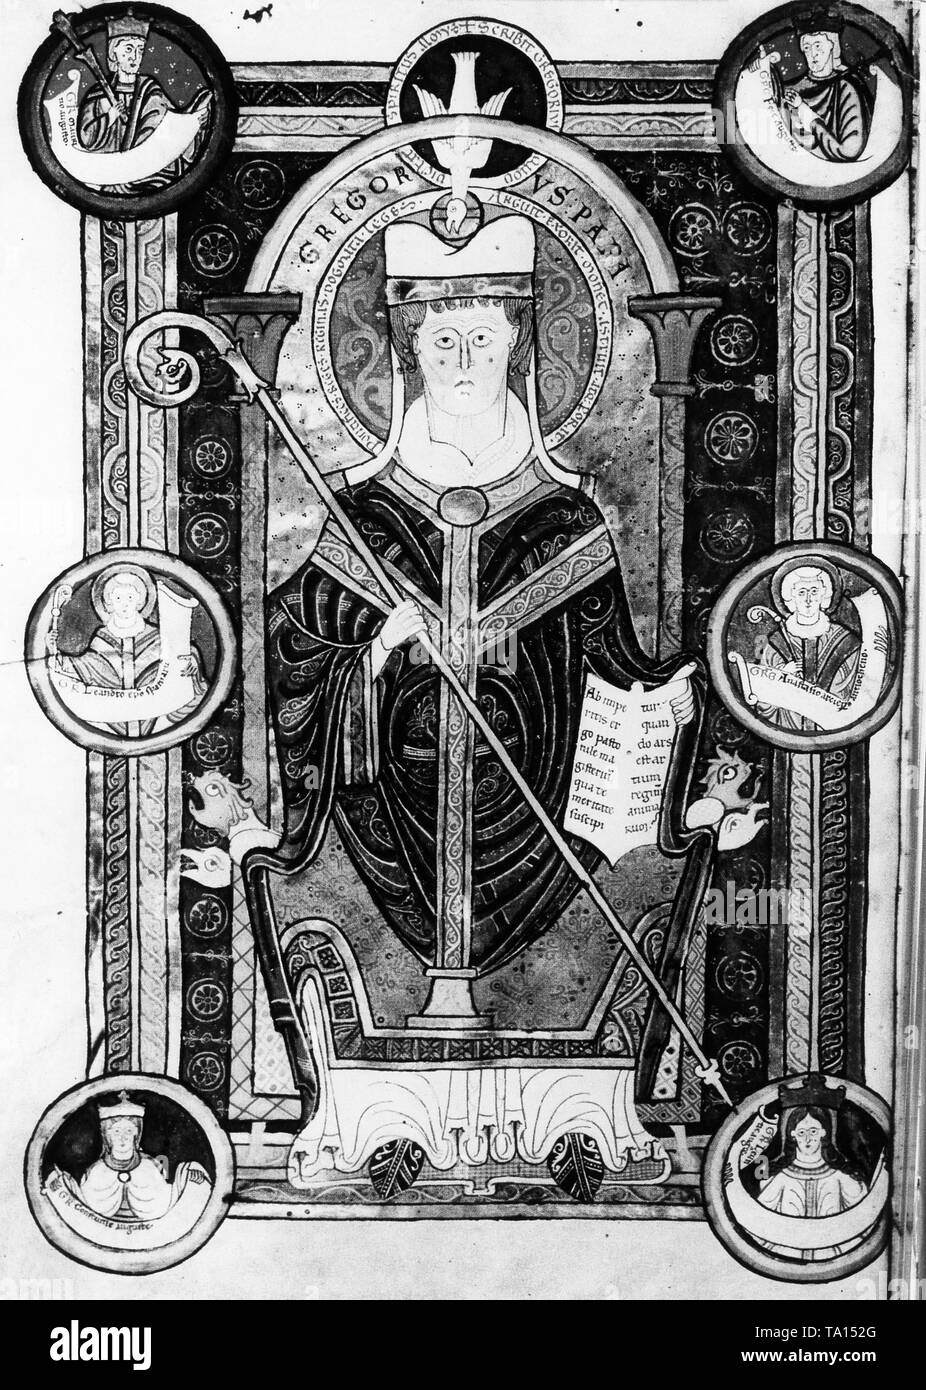 Illustration of the Abbey of St. Martin, Tournai (Epistles of Saint Gregory), circa 1150. Pope Gregory enthroned with crozier and book inspired by the Holy Spirit. Frame with six medallions with busts of his correspondents. Stock Photo